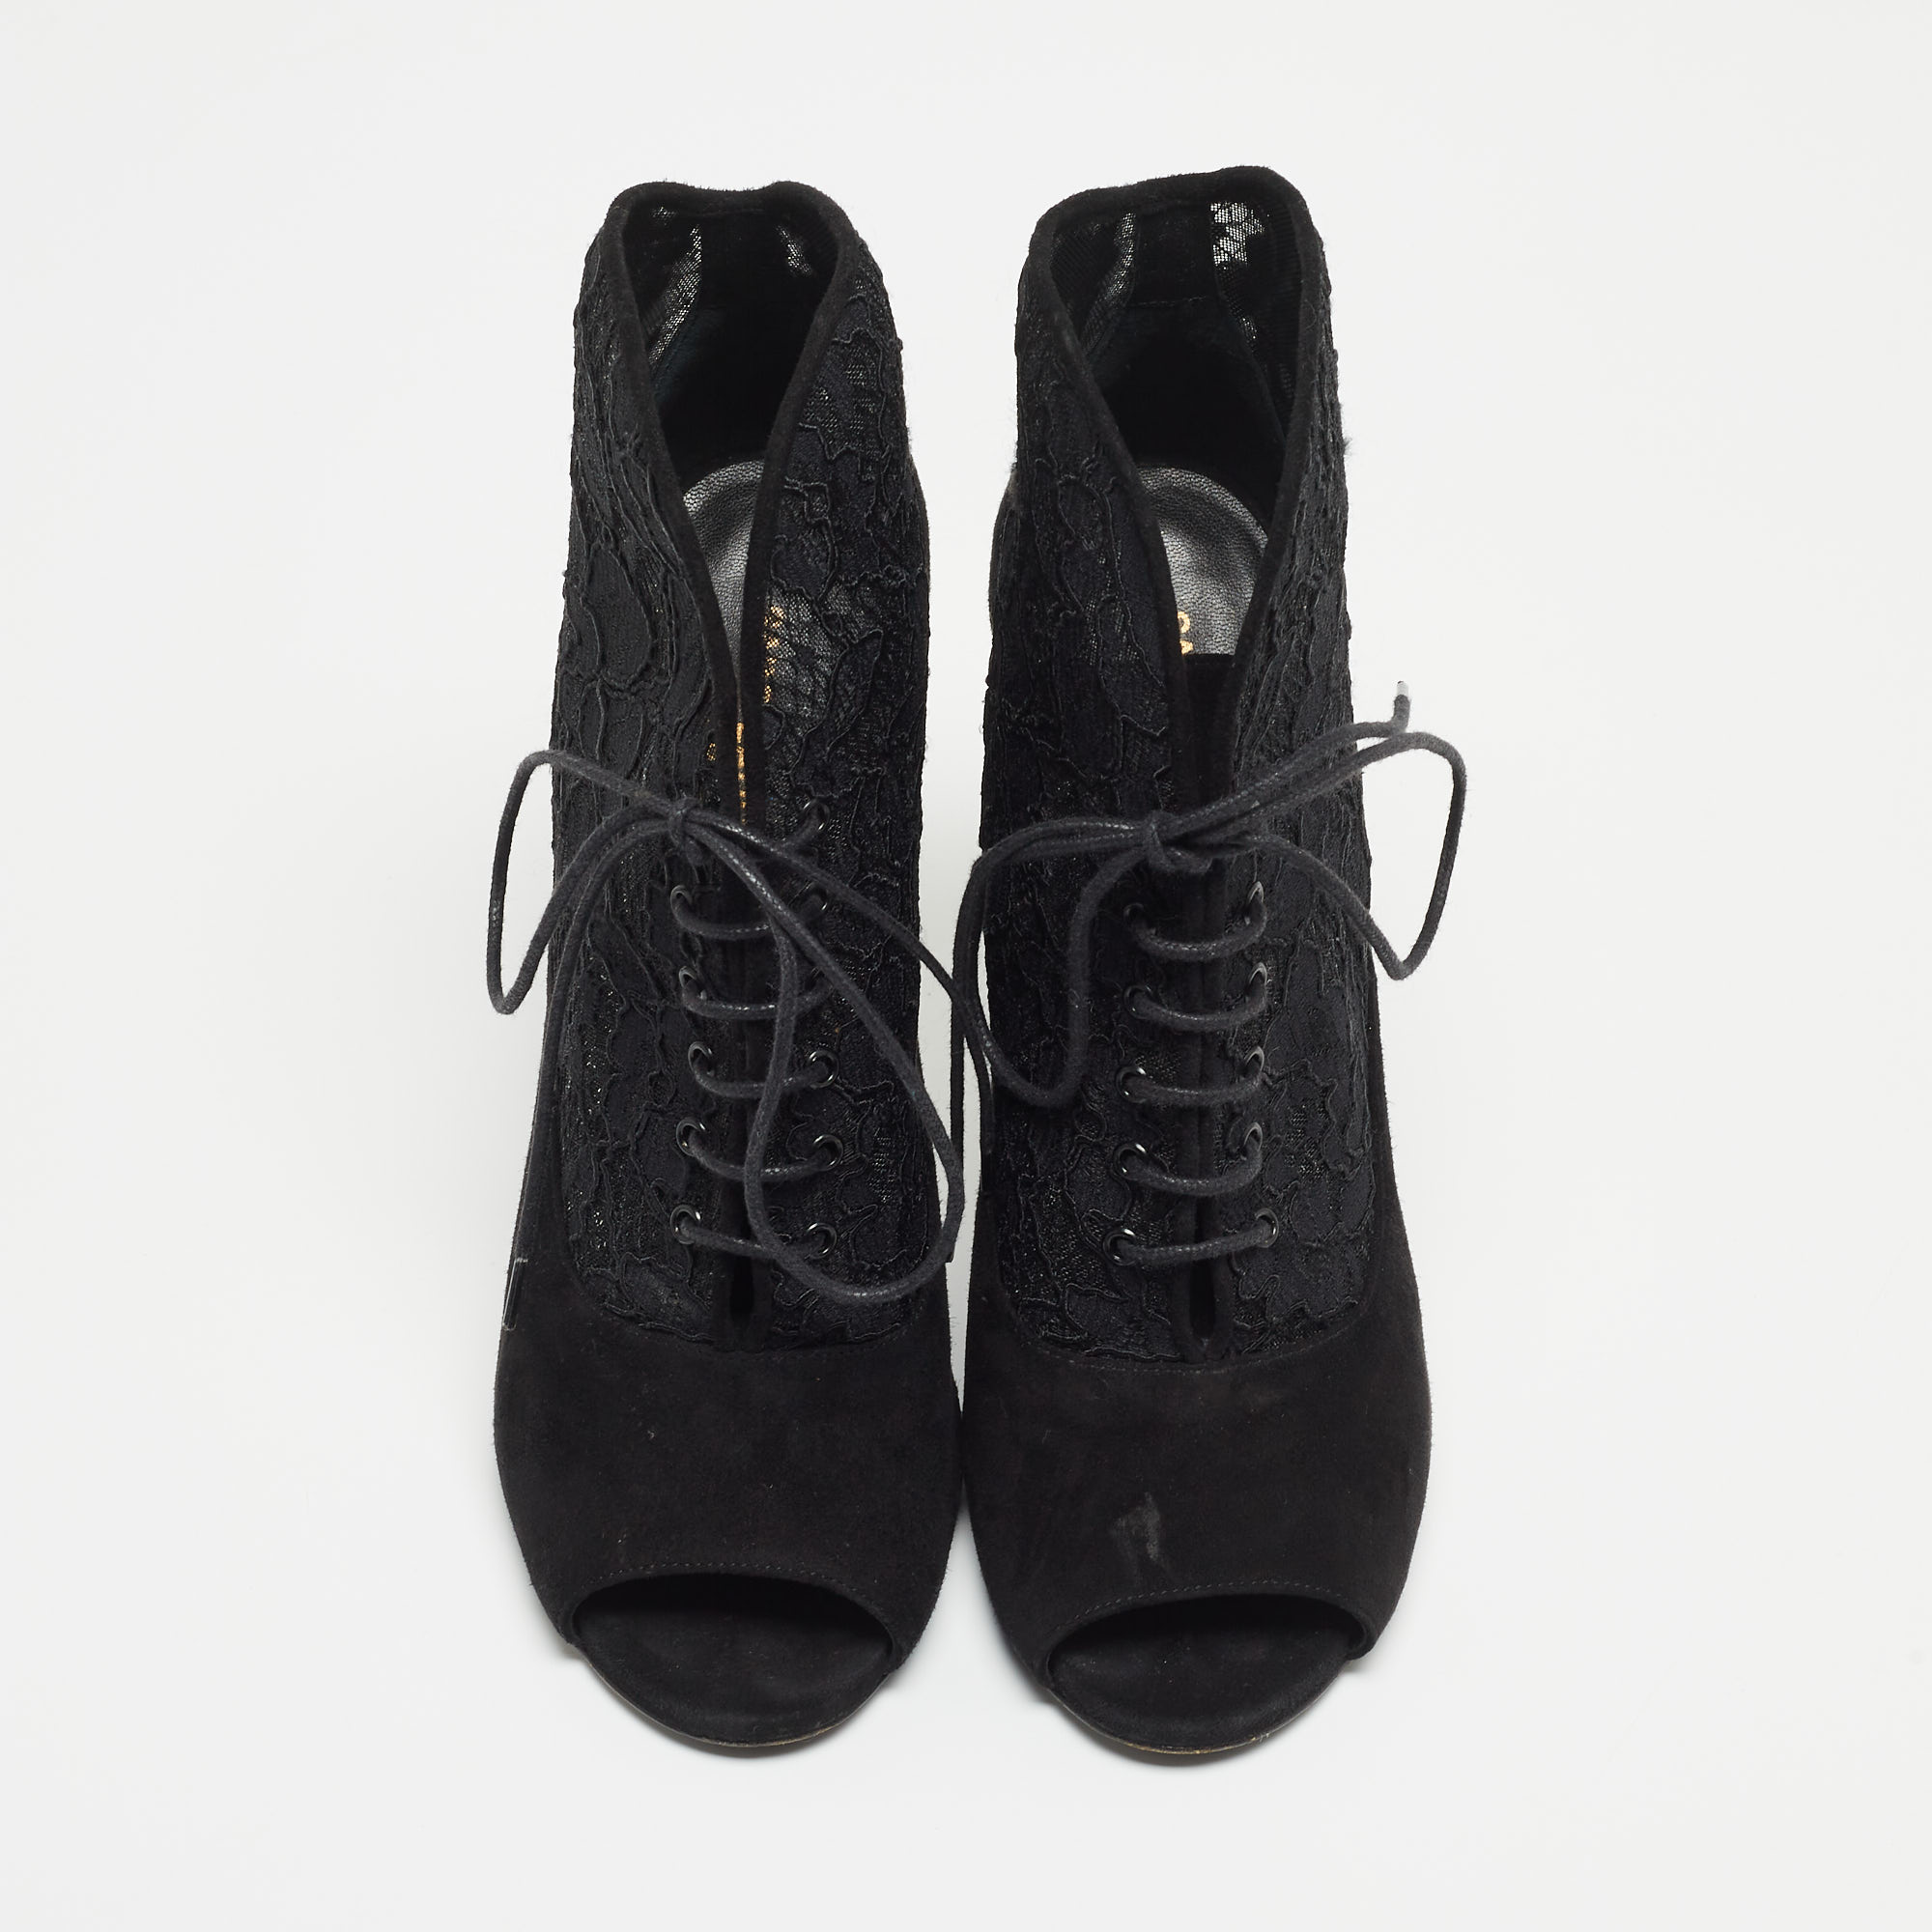 Saint Laurent Black Suede And Lace Open Toe Ankle Booties Size 39.5